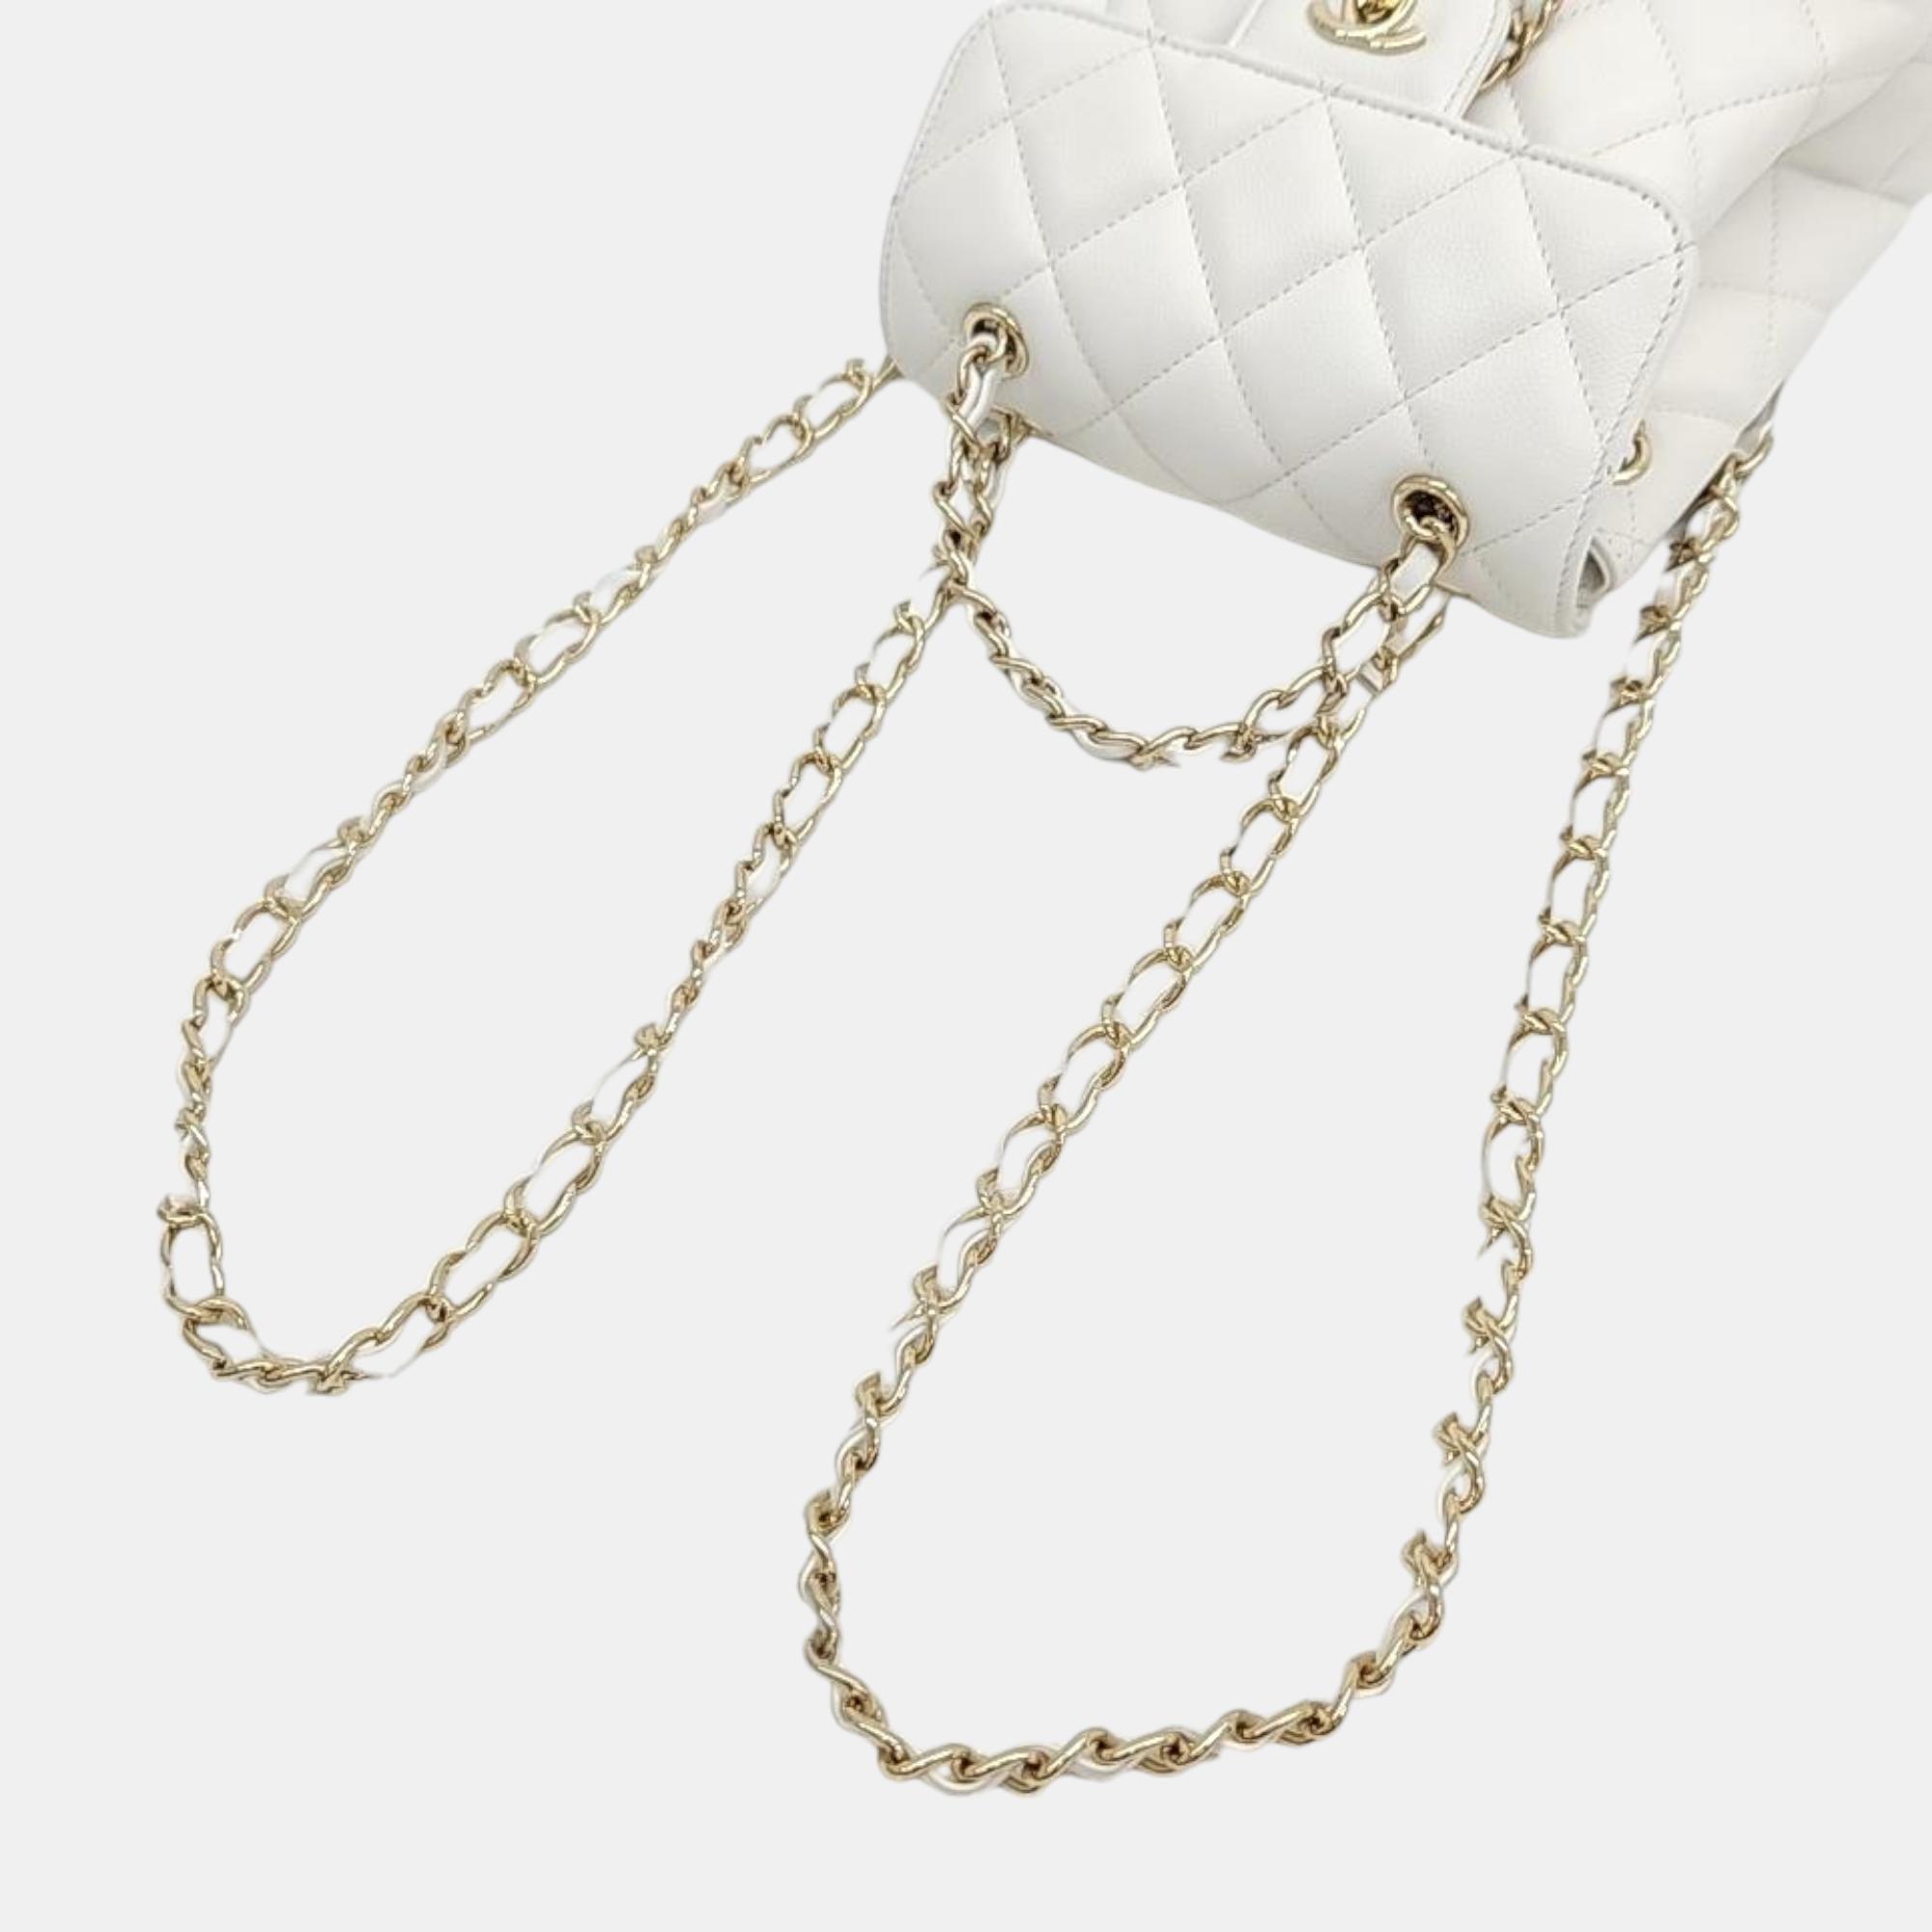 Chanel Caviar Two-Pocket Backpack